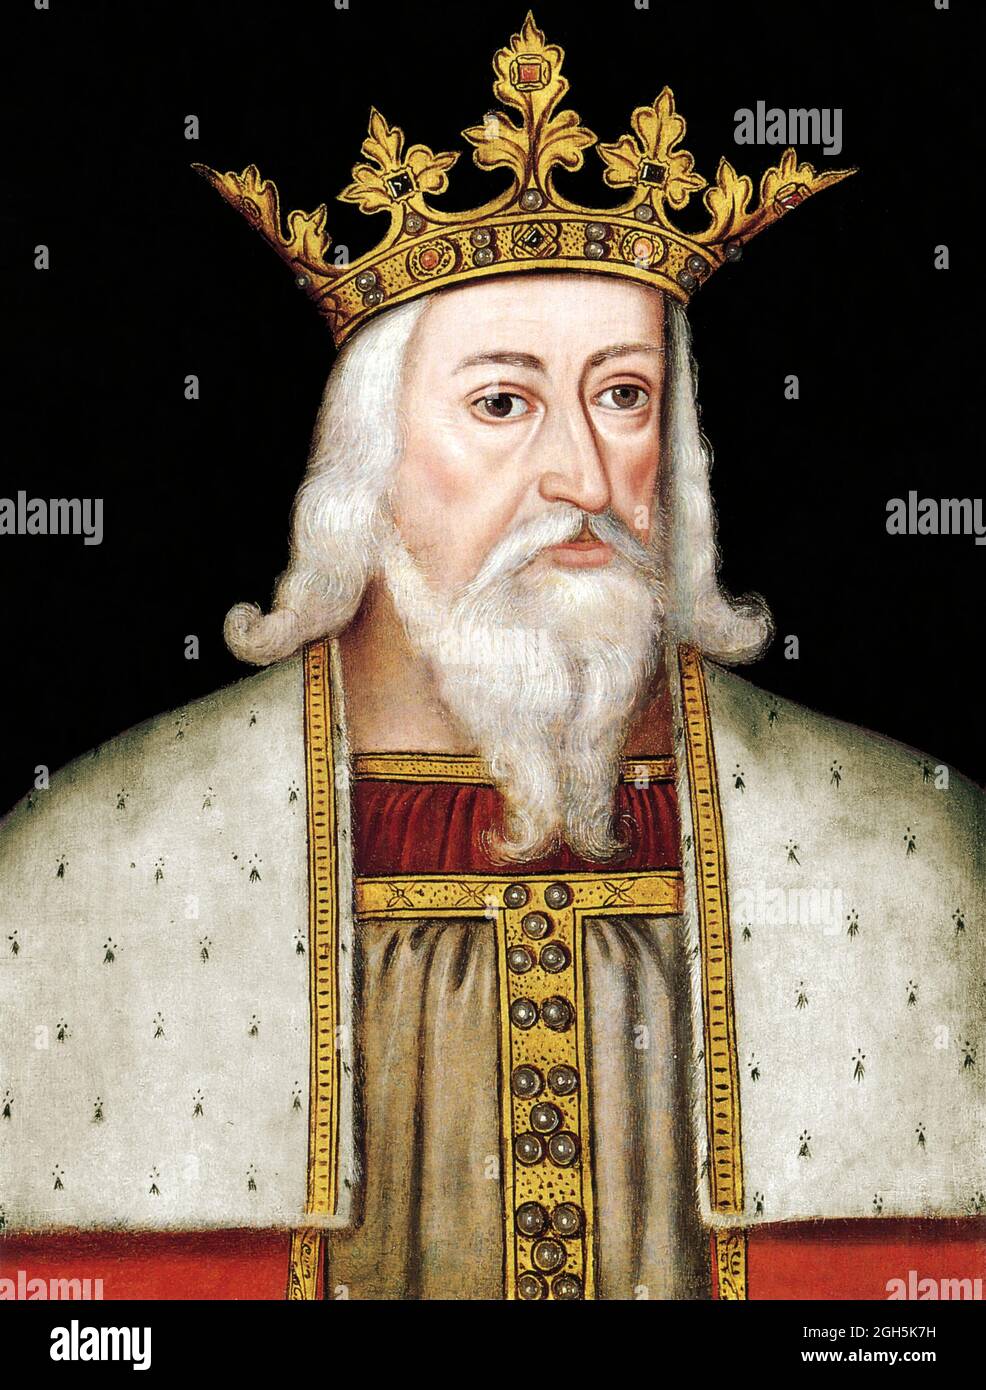 A portrait of King Edward III who was King of England from 1327 until 1377 Stock Photo